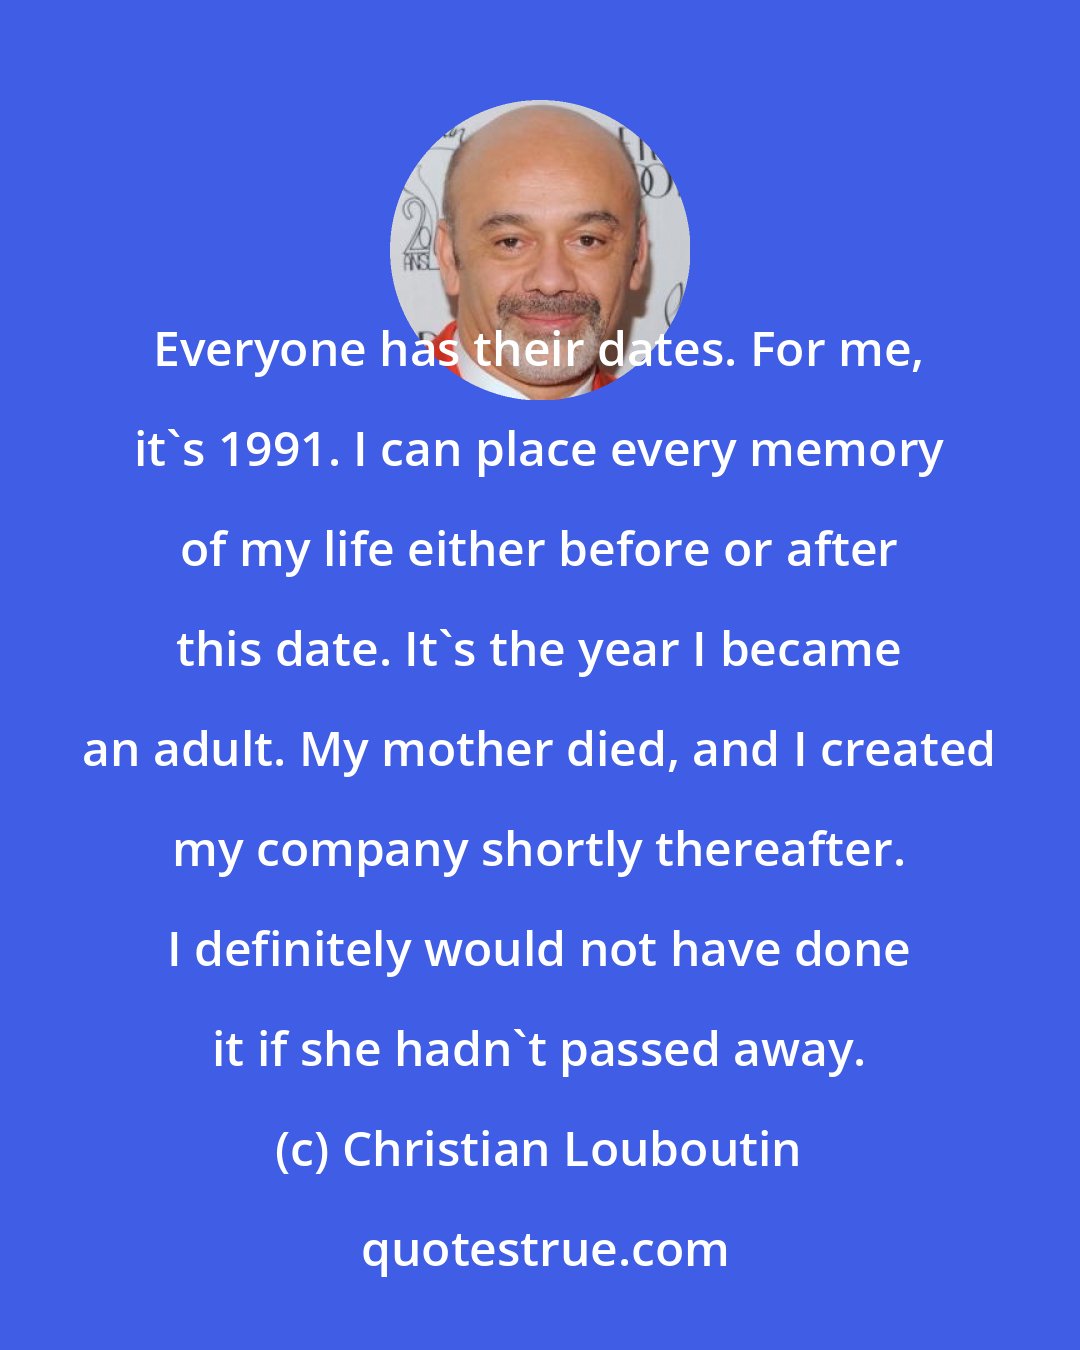 Christian Louboutin: Everyone has their dates. For me, it's 1991. I can place every memory of my life either before or after this date. It's the year I became an adult. My mother died, and I created my company shortly thereafter. I definitely would not have done it if she hadn't passed away.